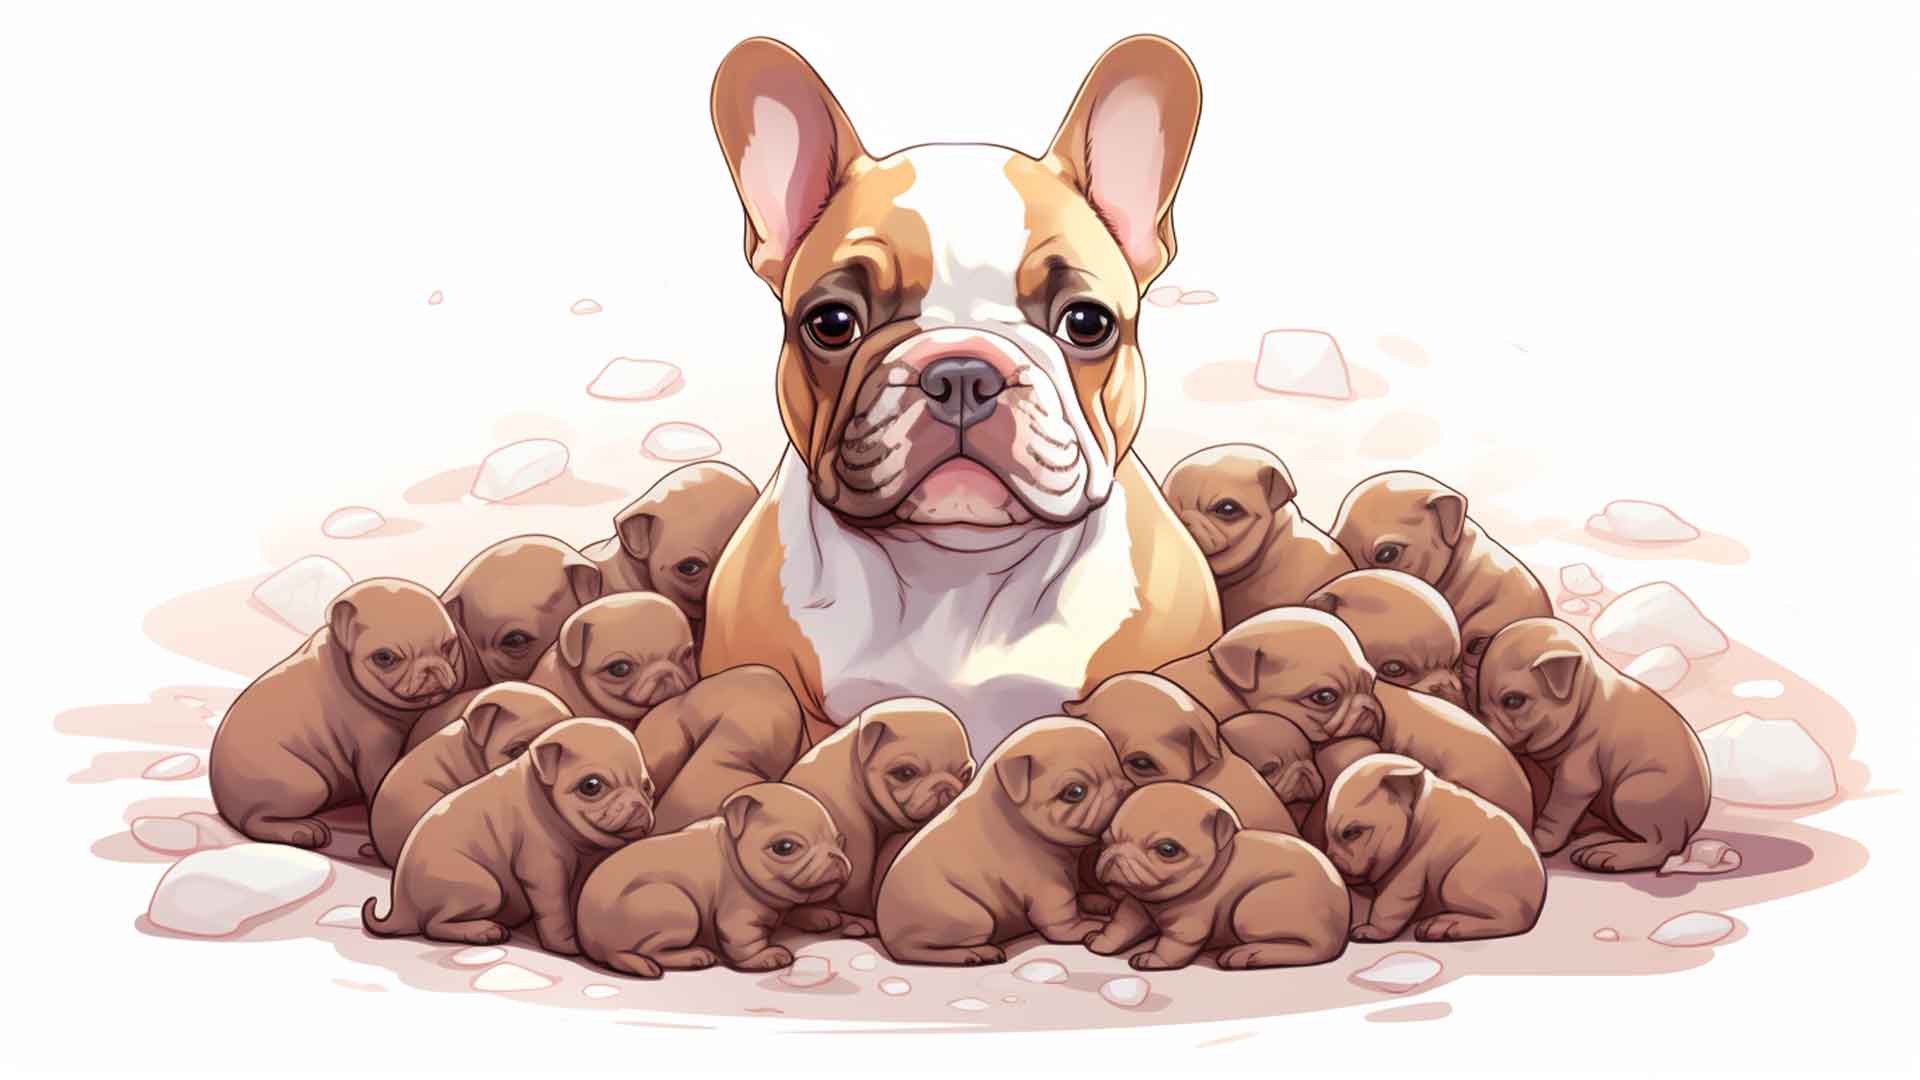 An illustration showcasing a resting micro bully with a transparent overlay of tiny puppy silhouettes in her belly, signifying her pregnancy state.